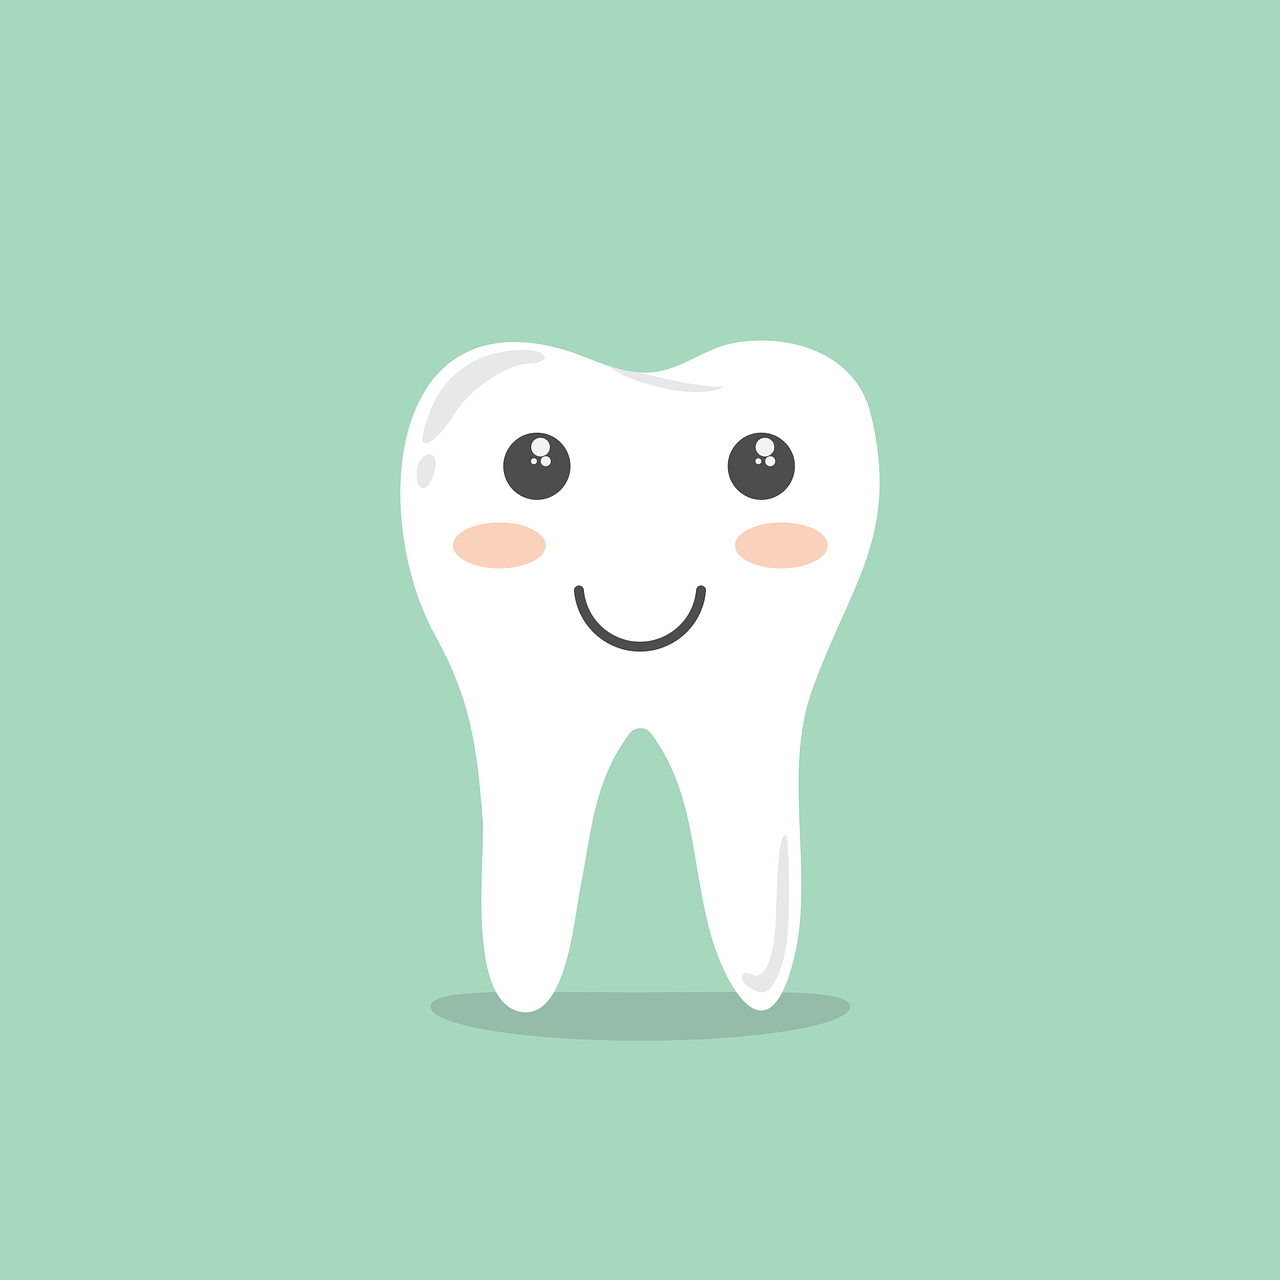 Download free photo of Teeth,cartoon,hygiene,cleaning,clipping - from  